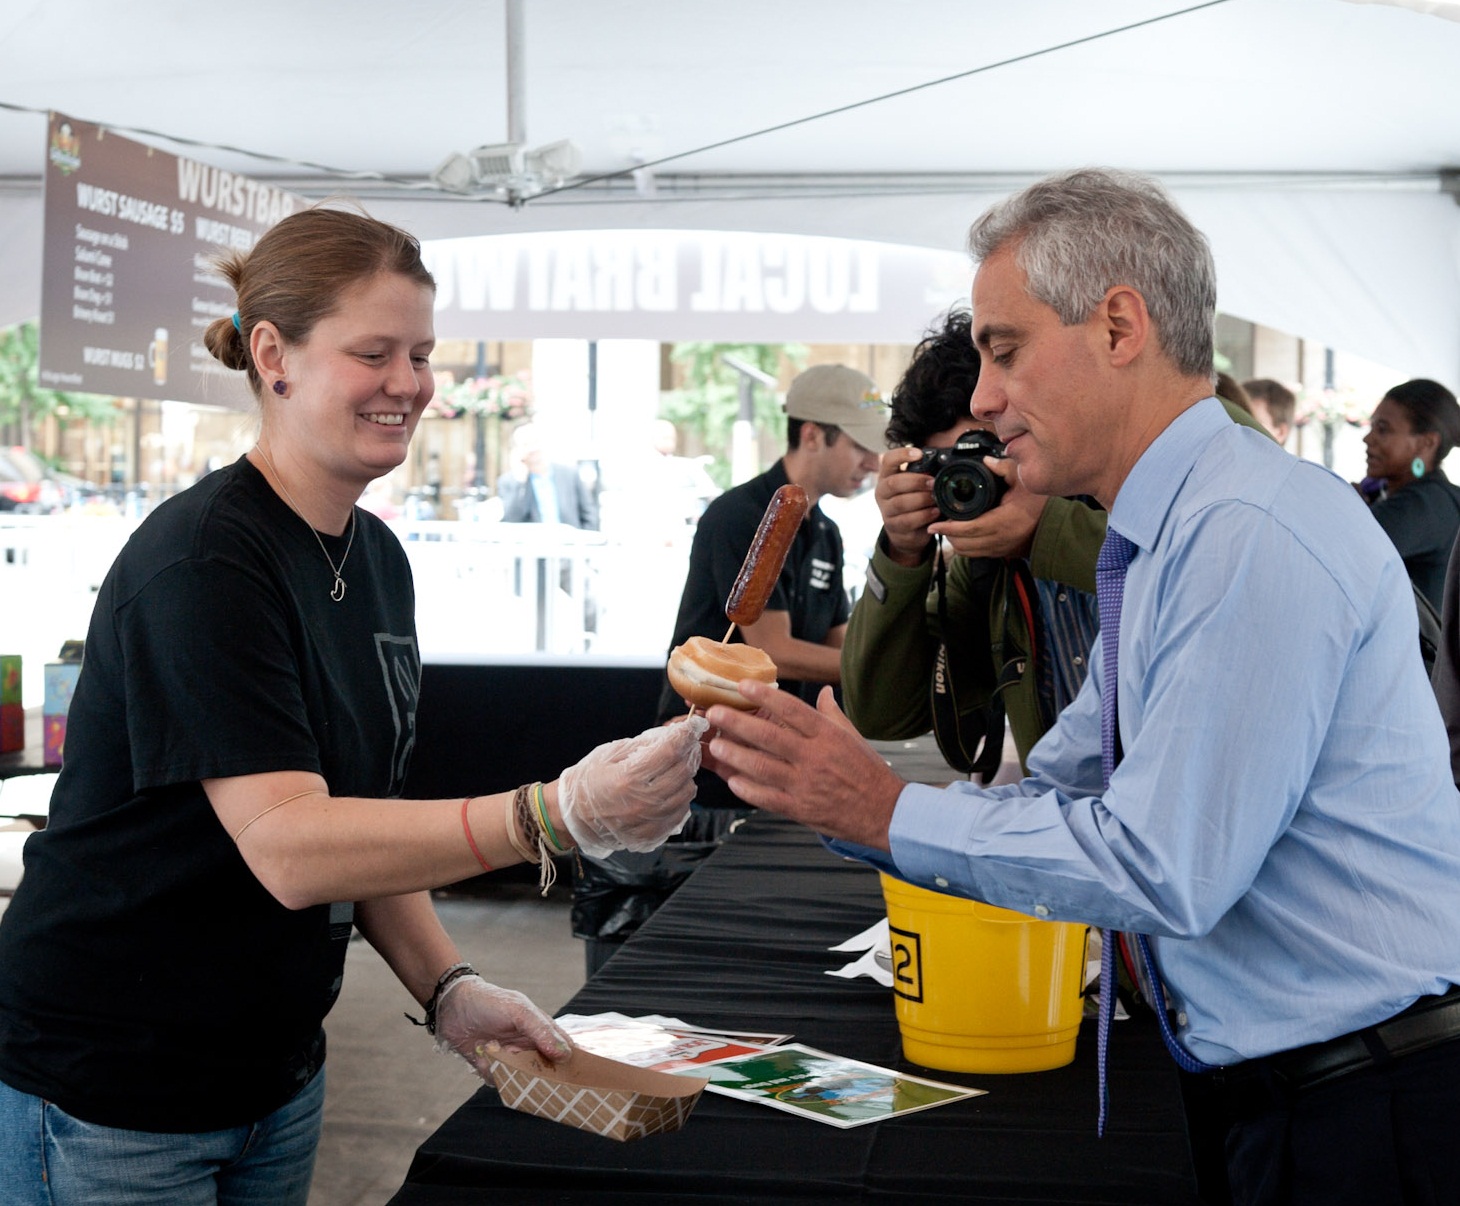  Mayor Emanuel joins residents at the opening day of The Wurst Festival at Daley Plaza